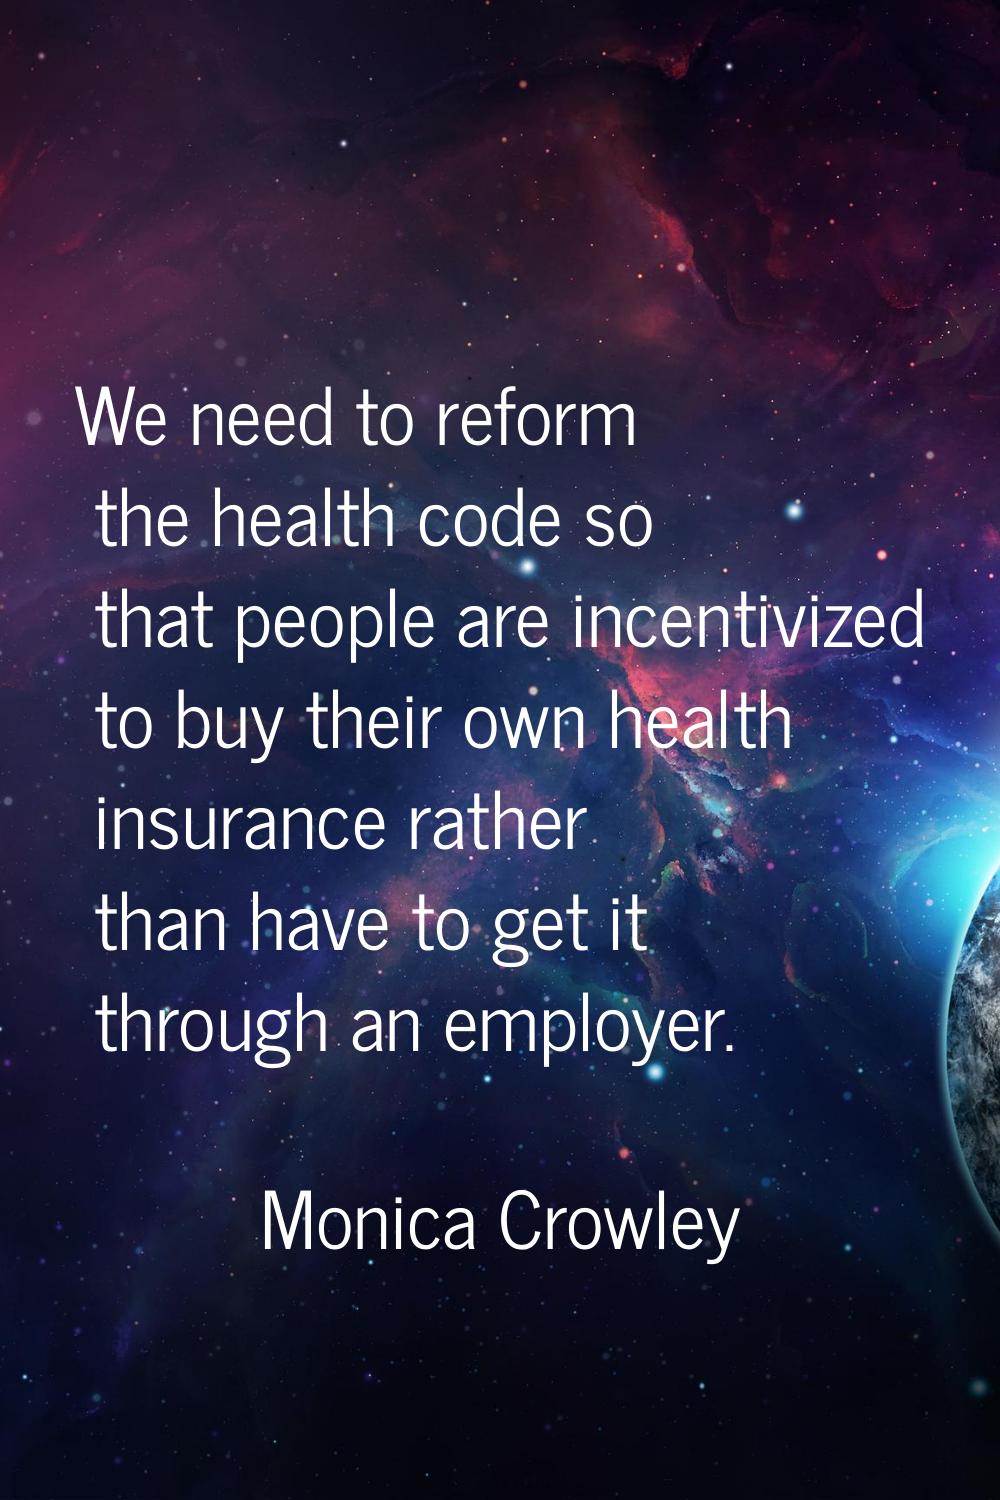 We need to reform the health code so that people are incentivized to buy their own health insurance